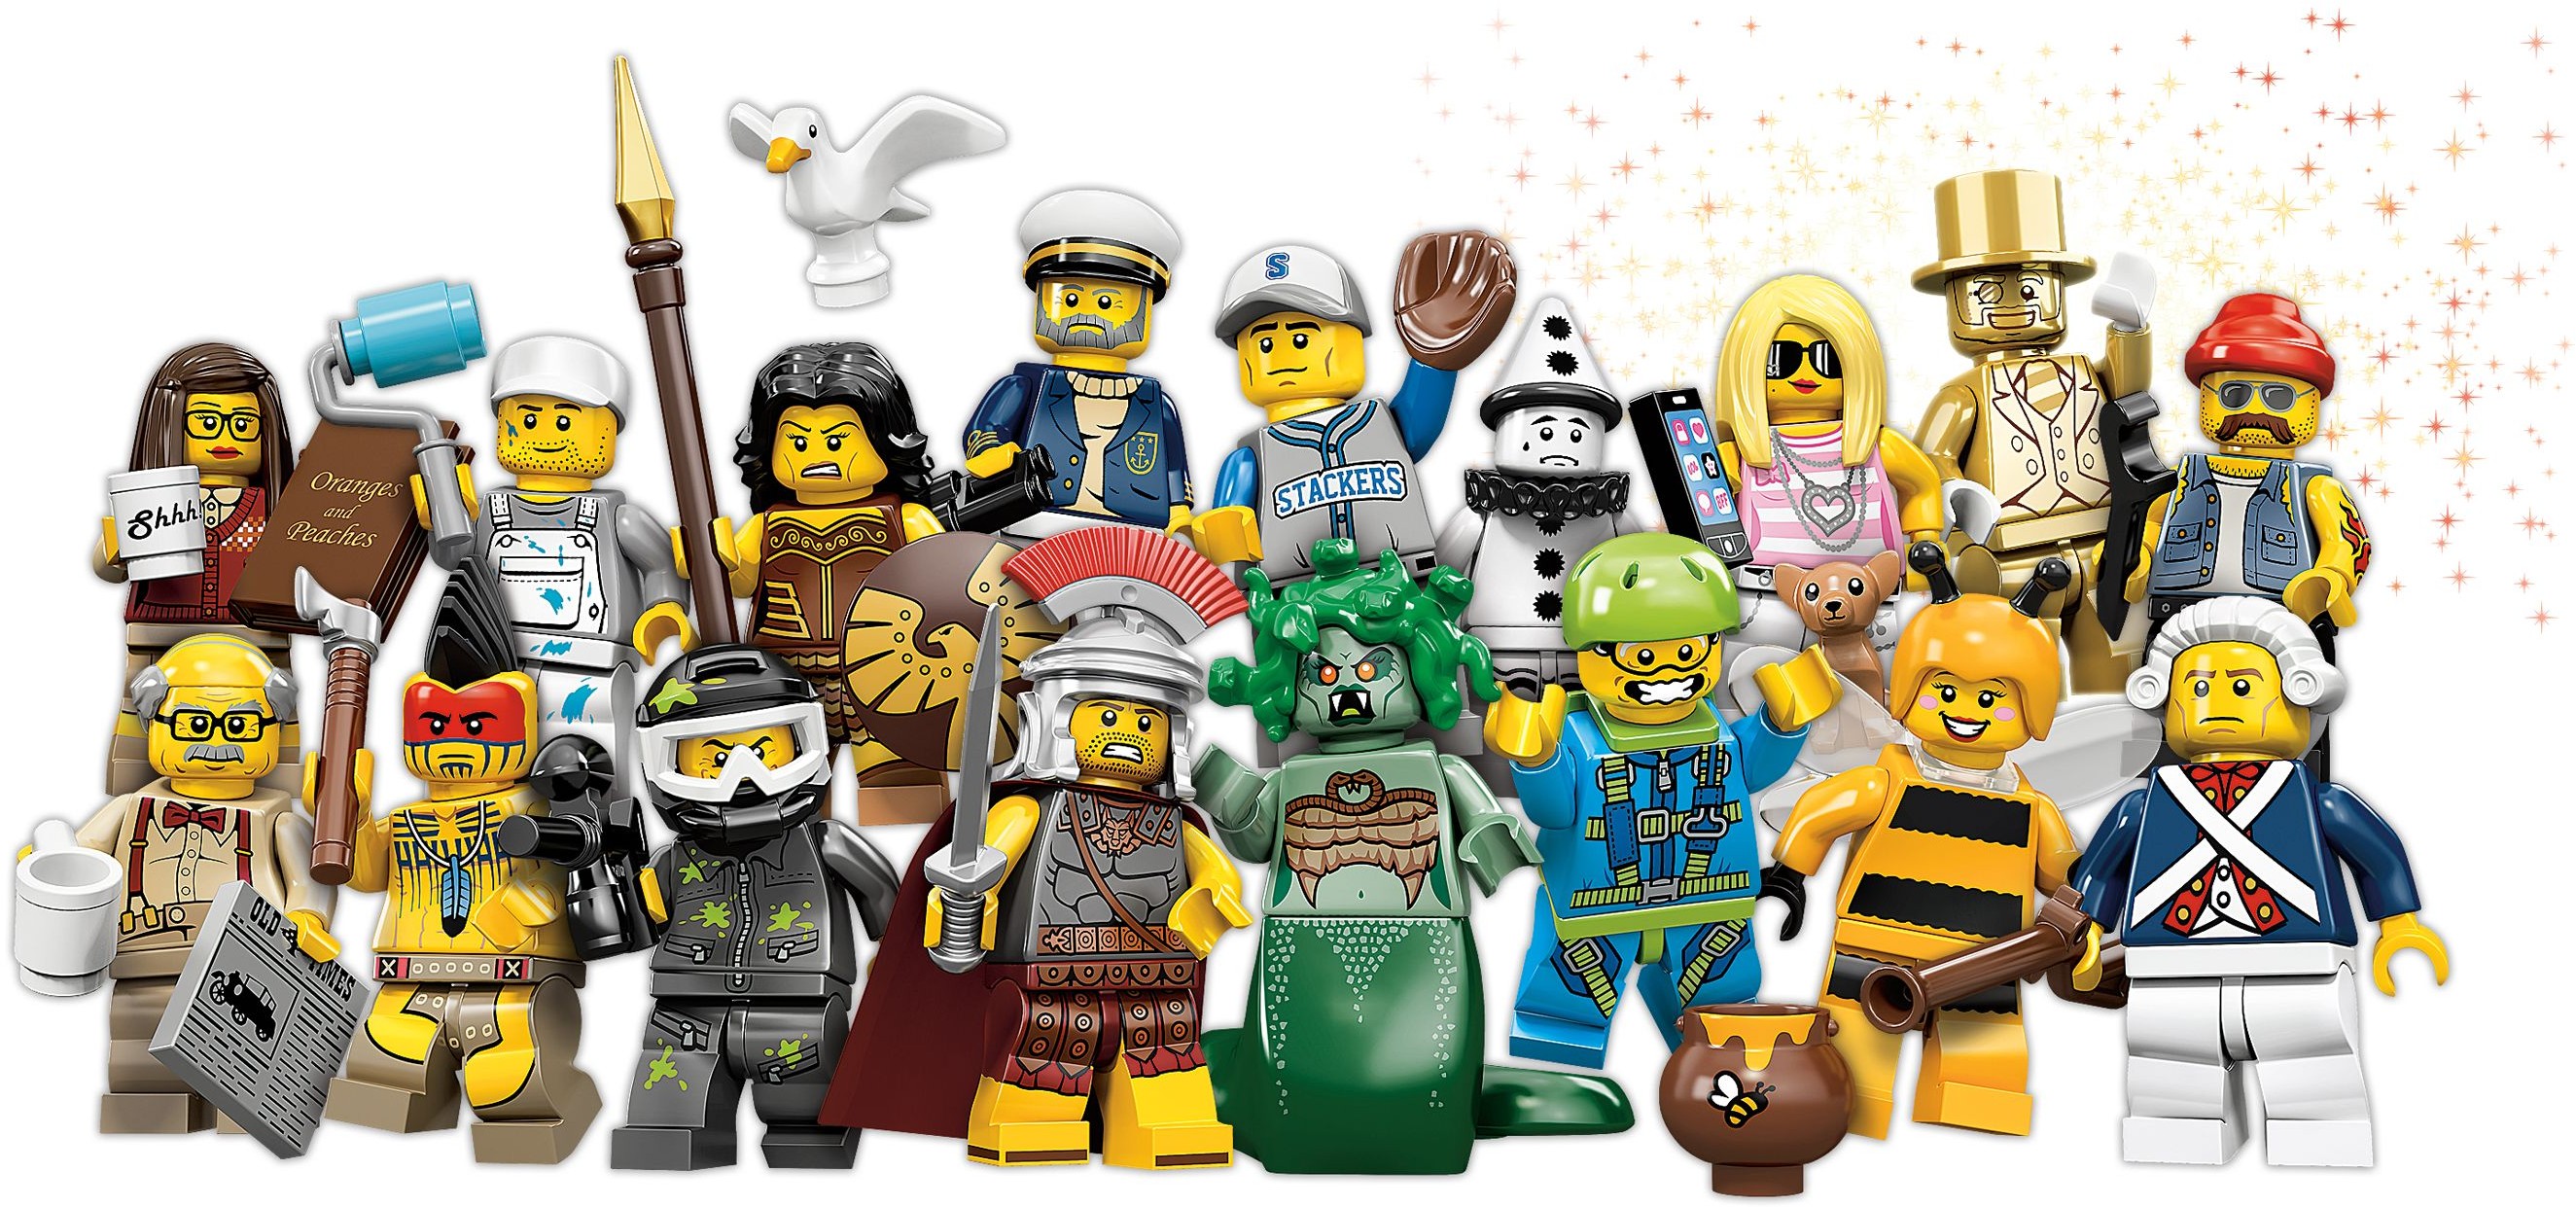 Thirty of the Coolest LEGO Mini Figures